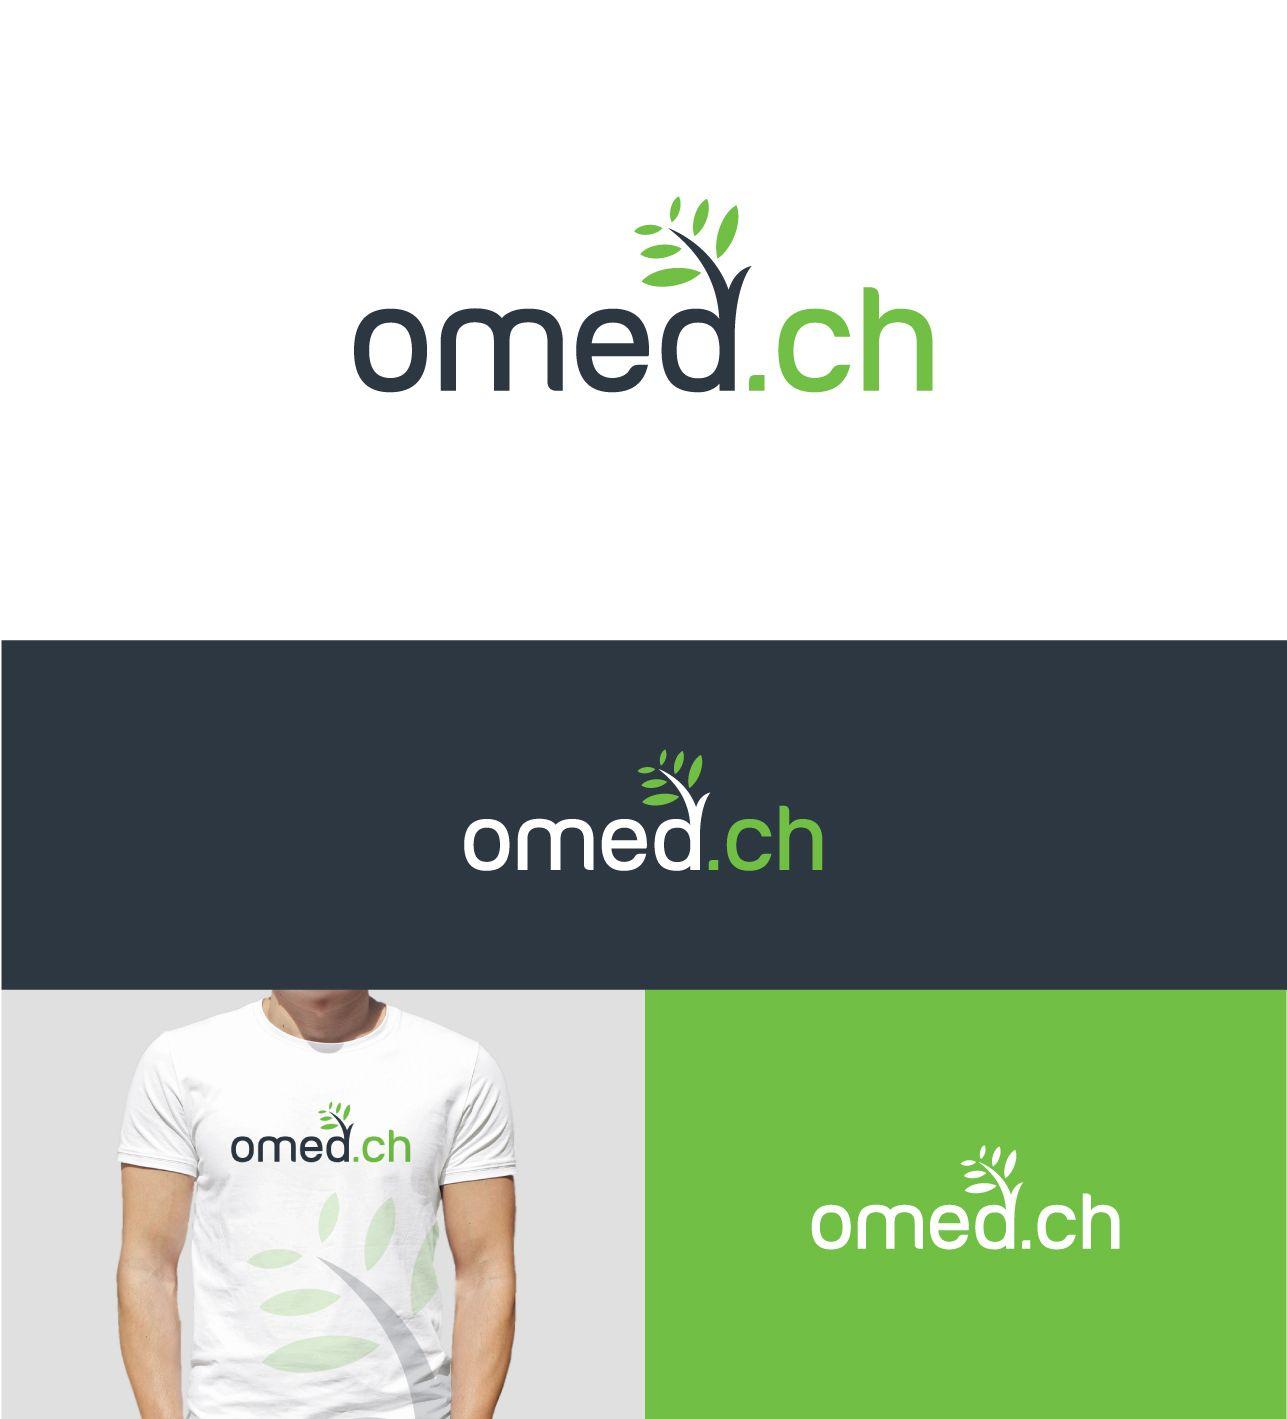 Health Product Logo - Modern, Bold, Health Product Logo Design for omed.ch by Azzambret ...